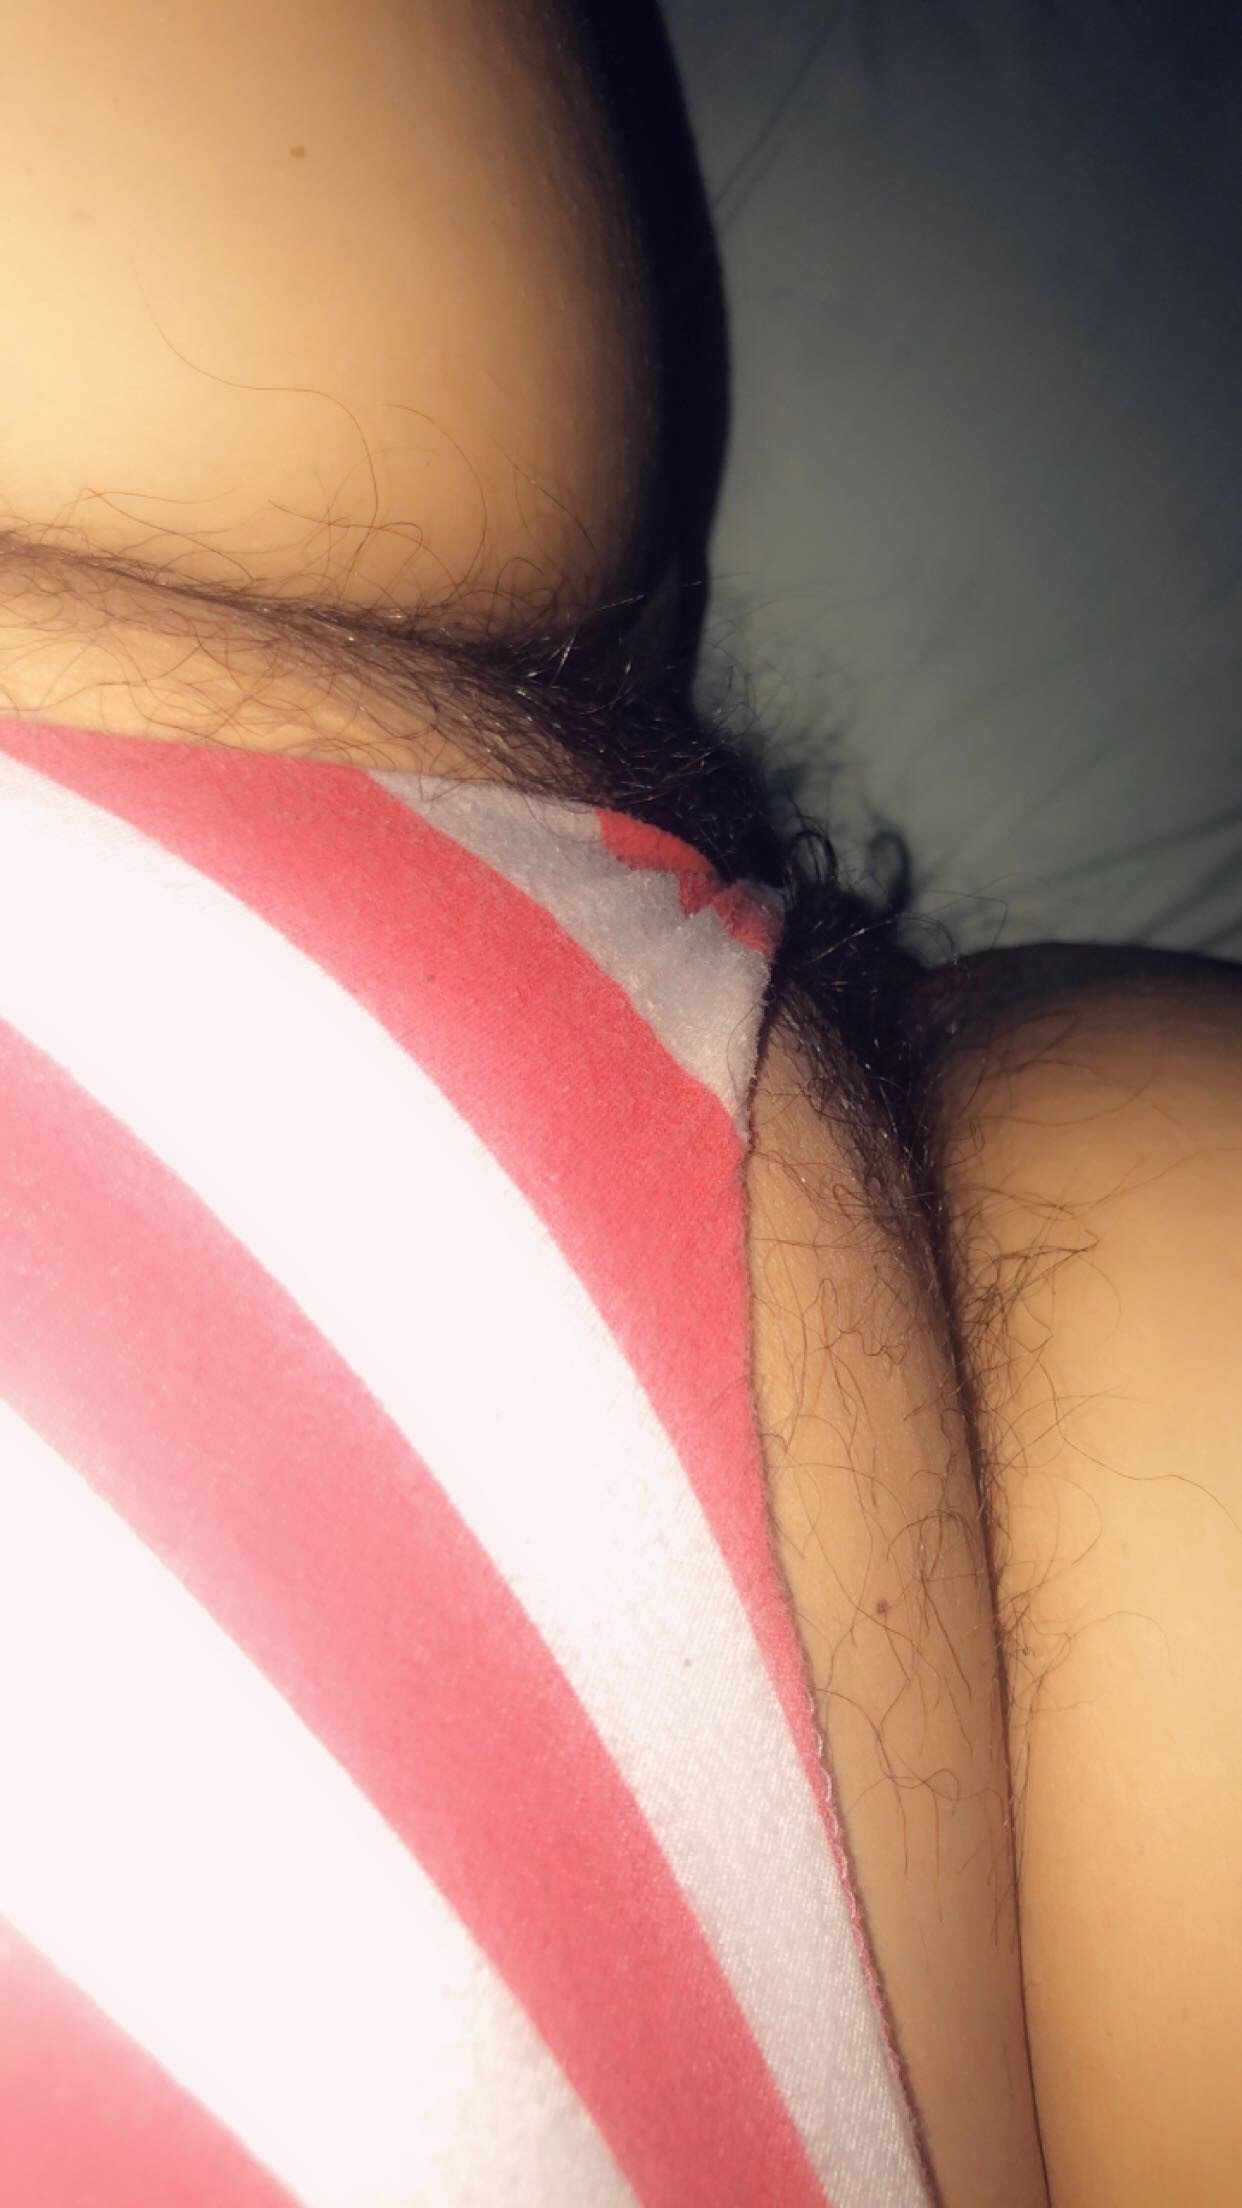 Watch the Photo by Nerdylatina13 with the username @Nerdylatina13, posted on September 21, 2020. The post is about the topic hairy pussy. and the text says 'Posting for the first time and I'm shy ☺️'